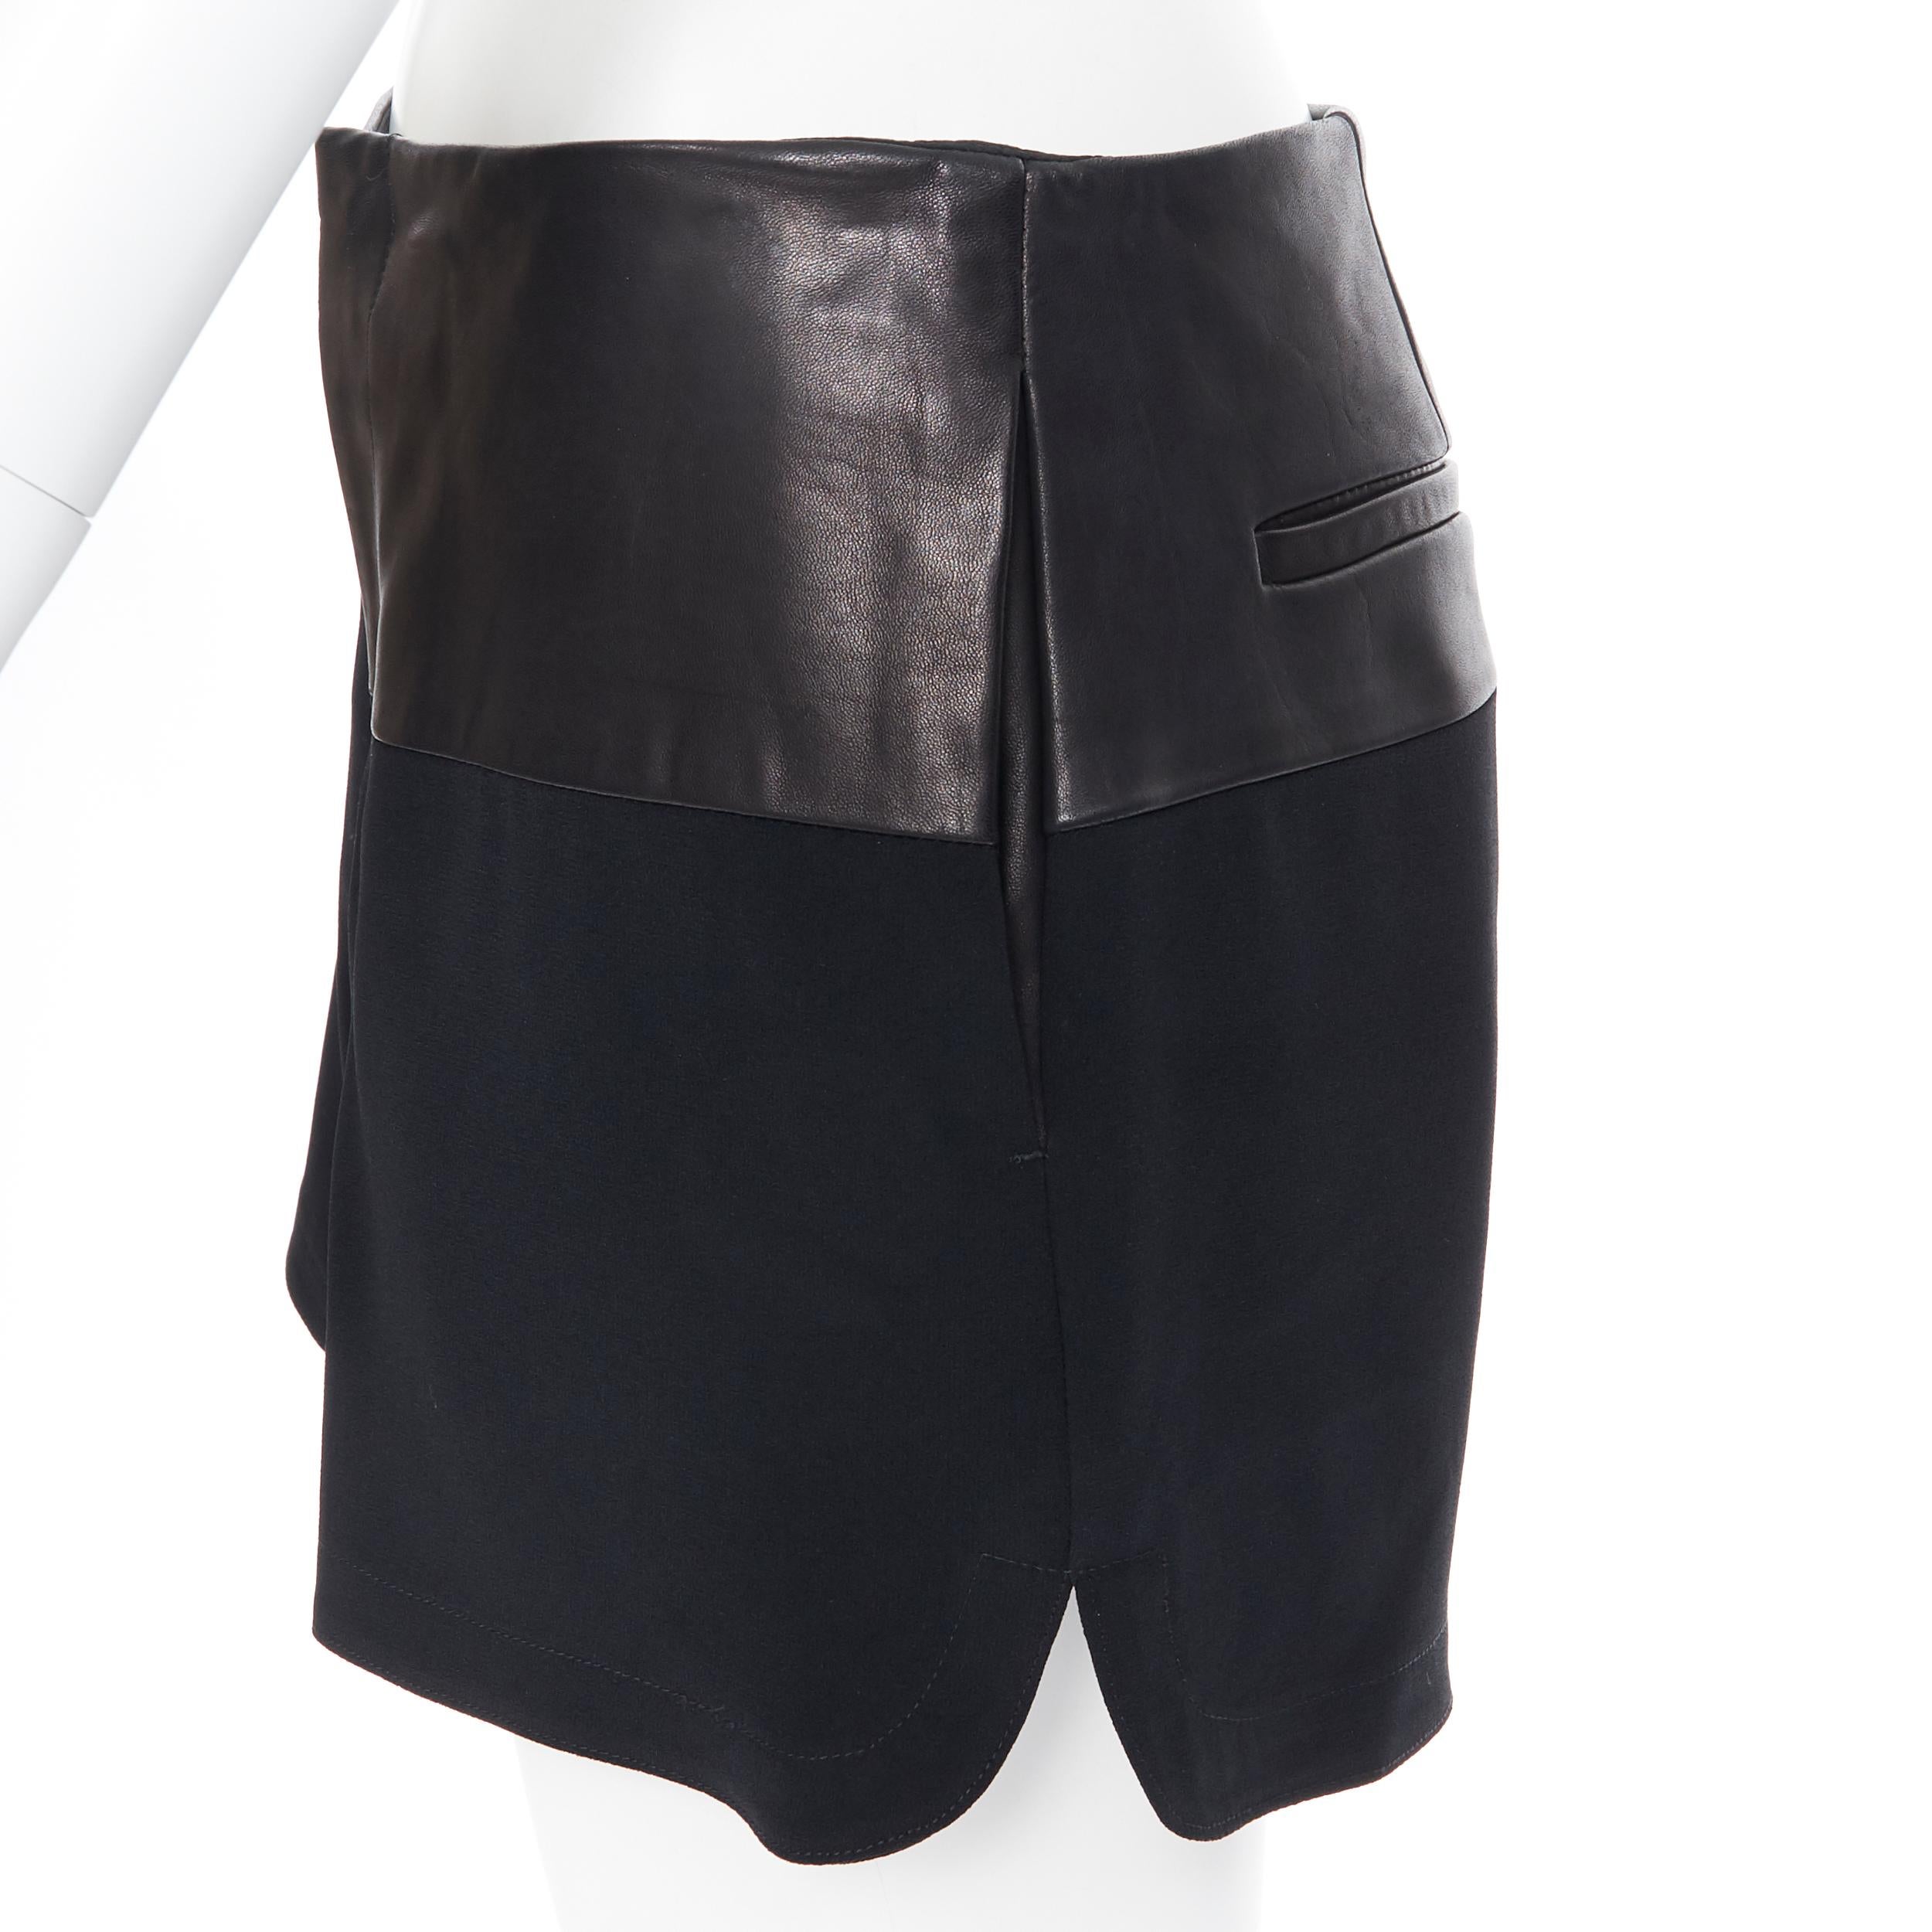 RAG & BONES black lamb leather waist viscose concealed zip shorts pants US4
Brand: Rag & Bones
Model Name / Style: Leather trimmed shorts
Material: Leather, viscose
Color: Black
Pattern: Solid
Closure: Zip
Extra Detail: 4-pockets.
Made in: